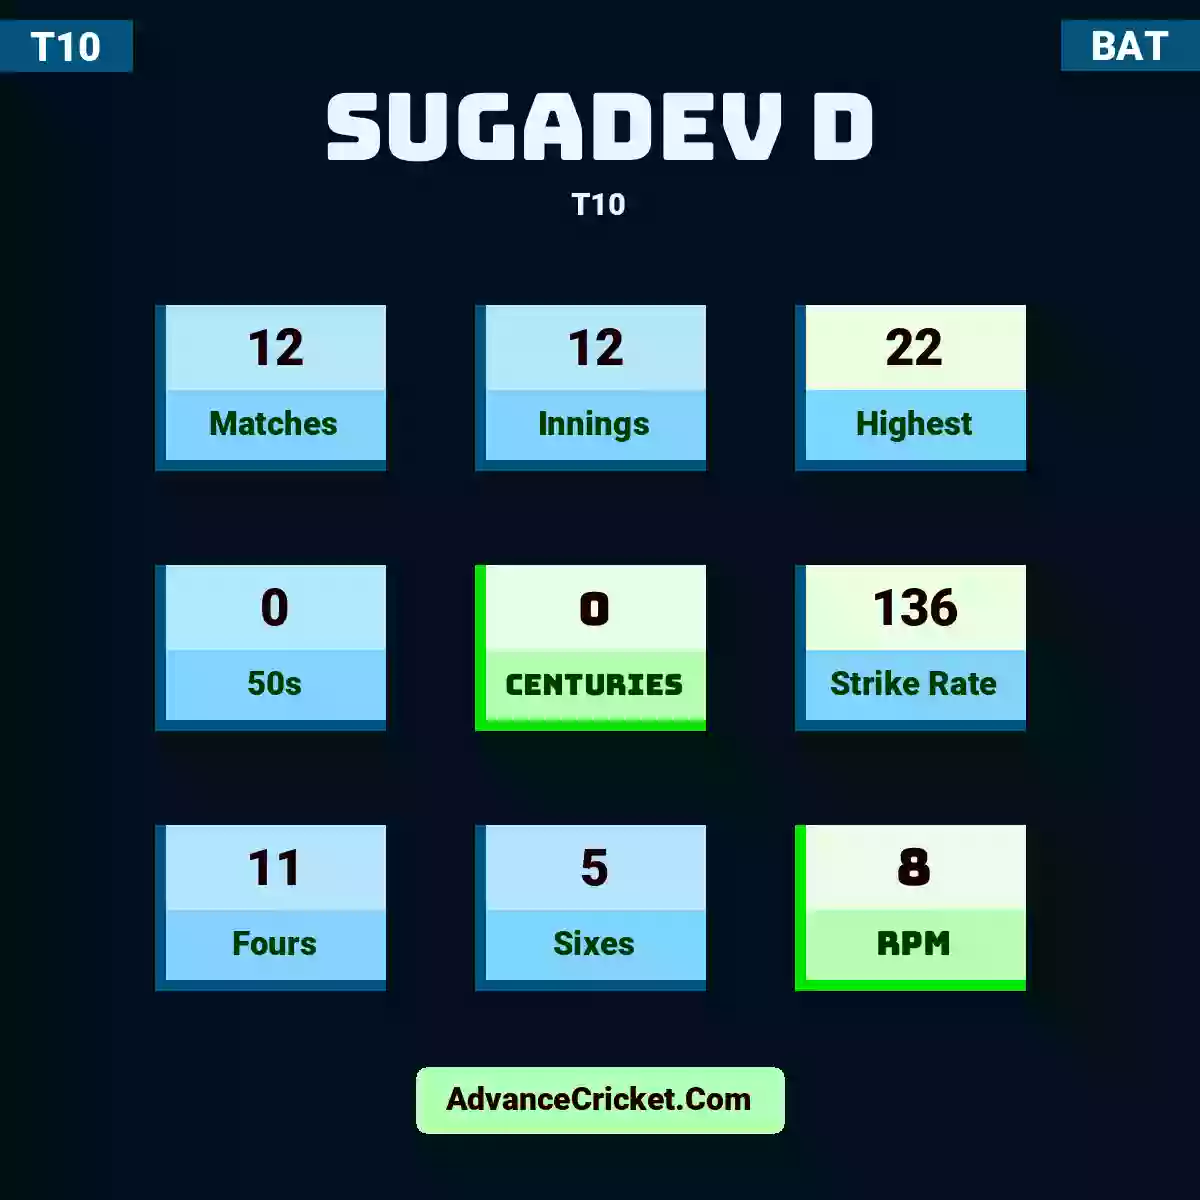 Sugadev D T10 , Sugadev D played 12 matches, scored 22 runs as highest, 0 half-centuries, and 0 centuries, with a strike rate of 136. S.D hit 11 fours and 5 sixes, with an RPM of 8.